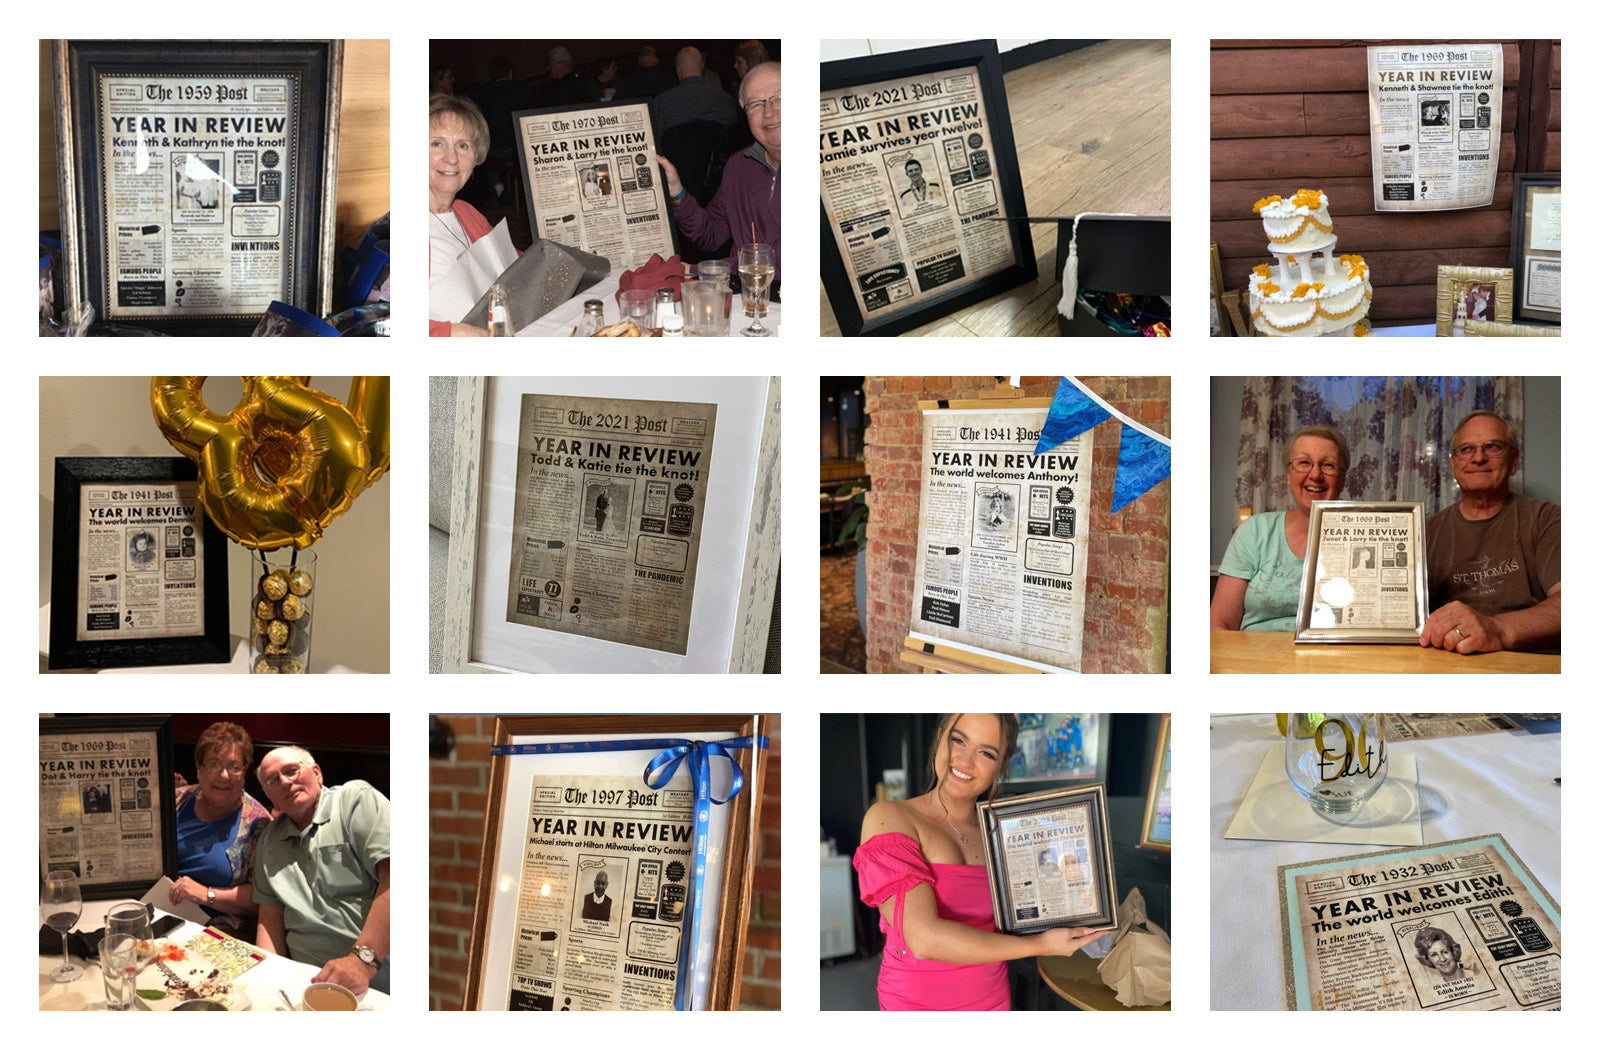 Examples of happy customers and displays of birthday and anniversary newspaper gifts.